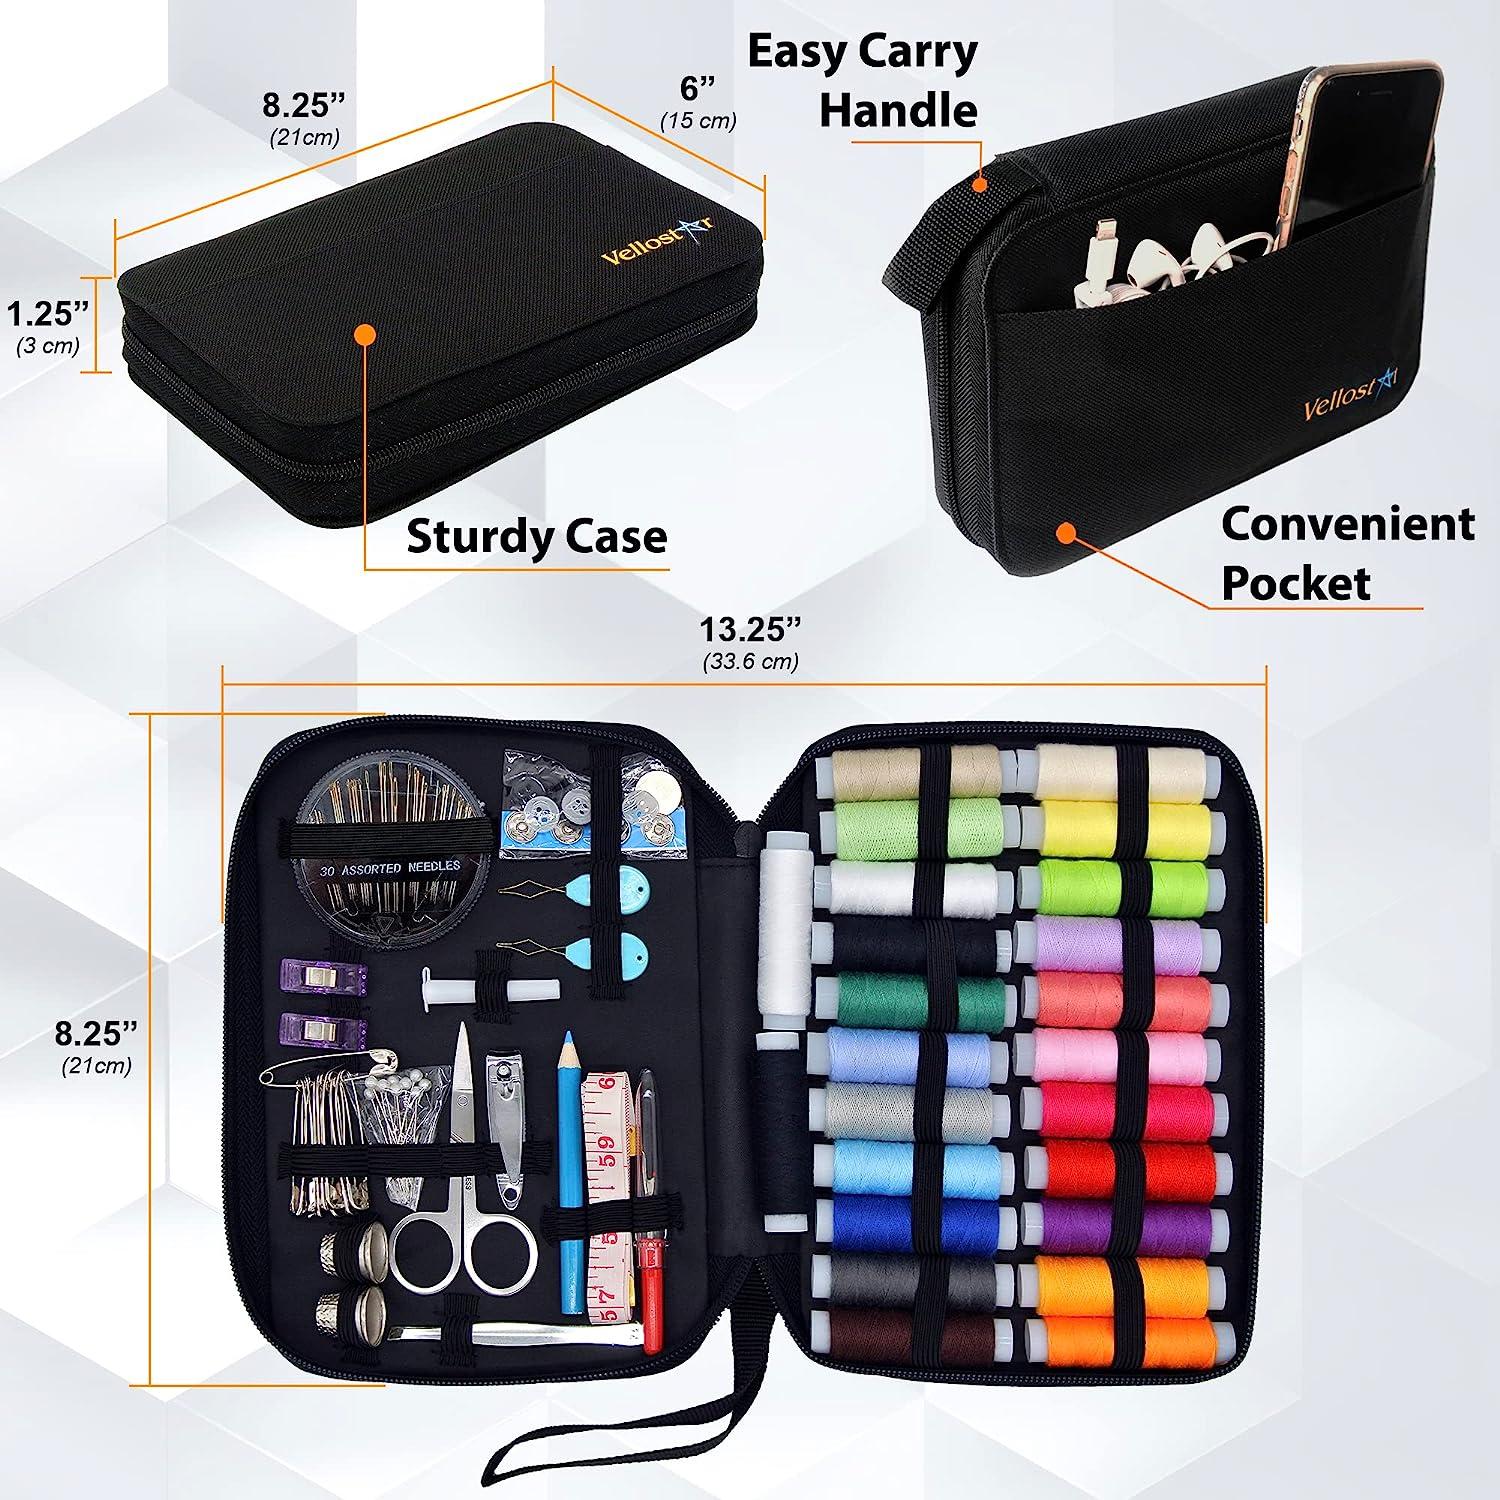 Compact Sewing Kit for Home, Travel, Camping & Emergency. Best Gift Small  Black